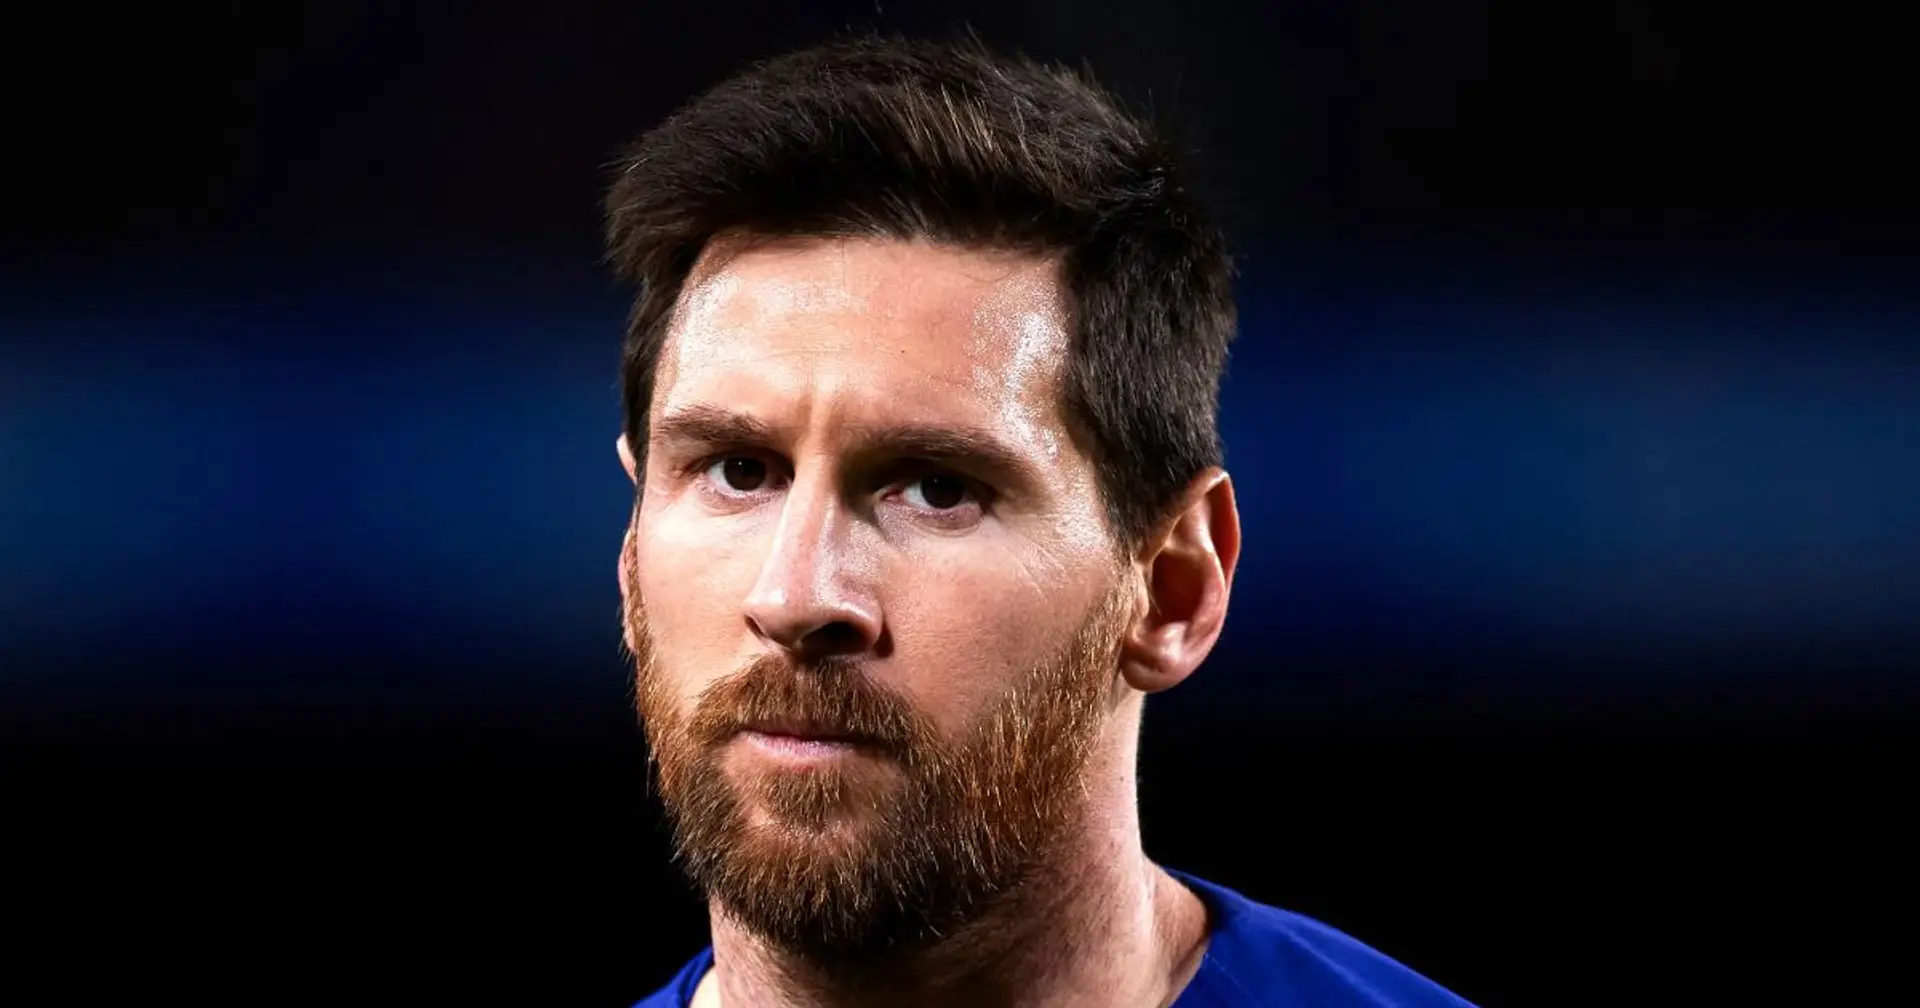 BREAKING: Messi will not arrive for COVID-19 tests tomorrow — multiple sources